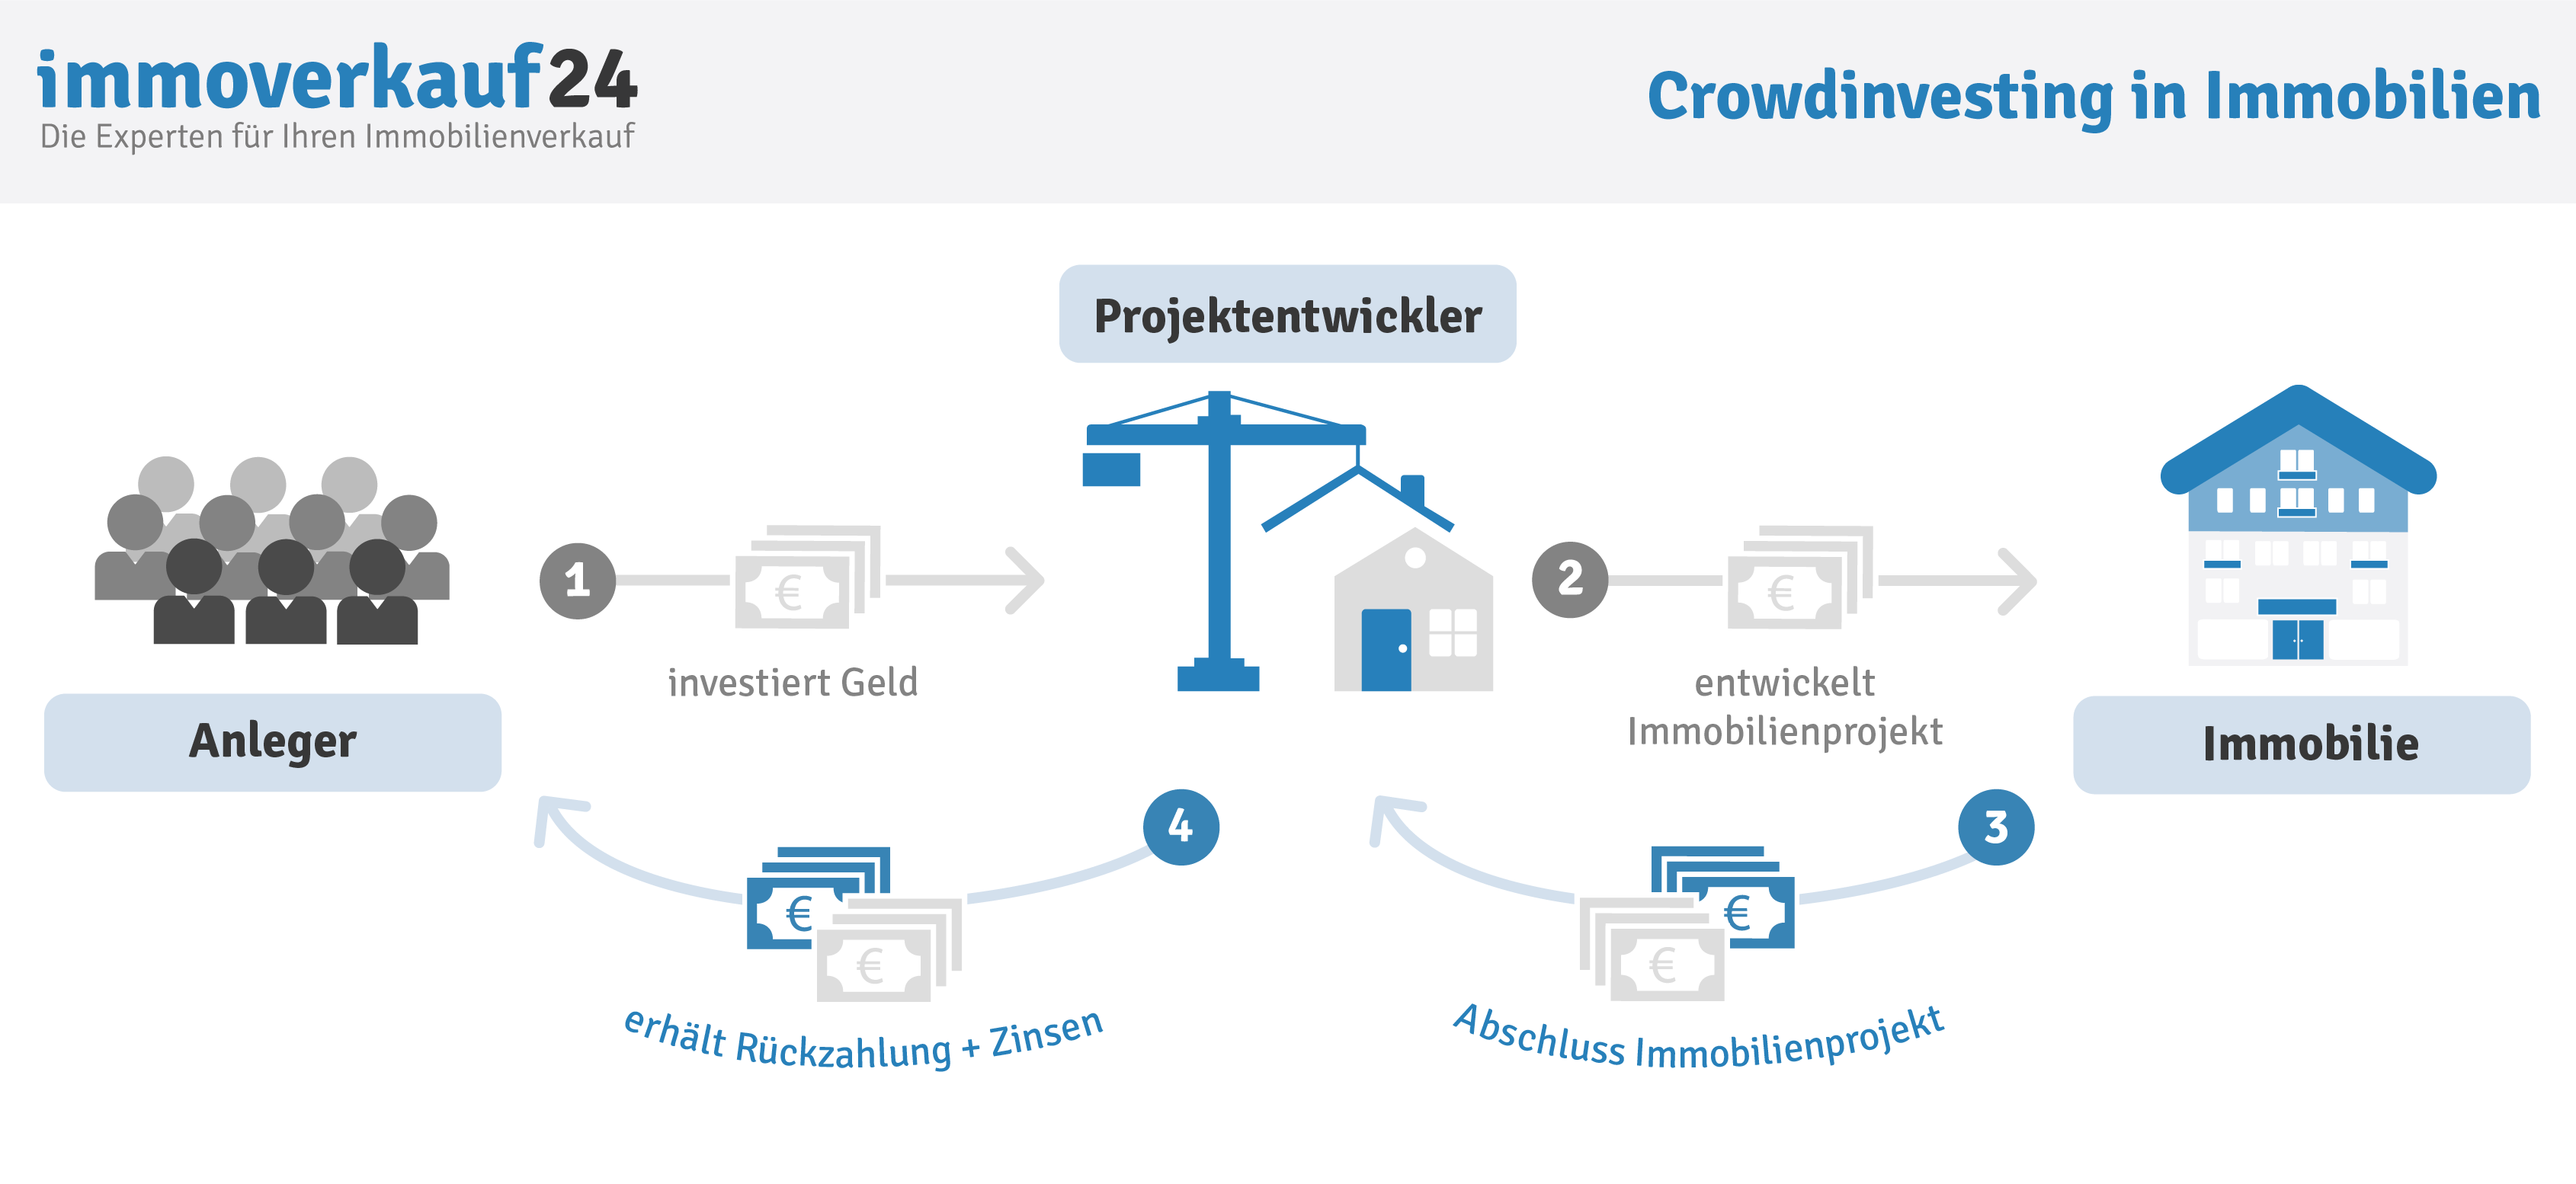 Crowdinvesting in Immobilien